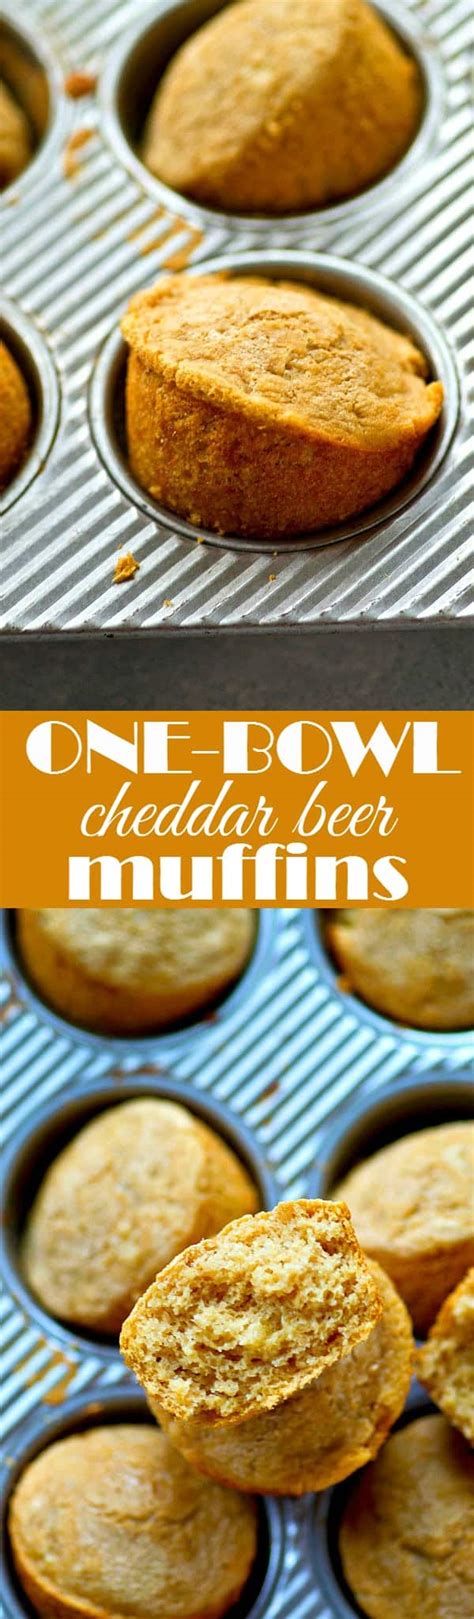 One Bowl Cheddar Beer Muffins